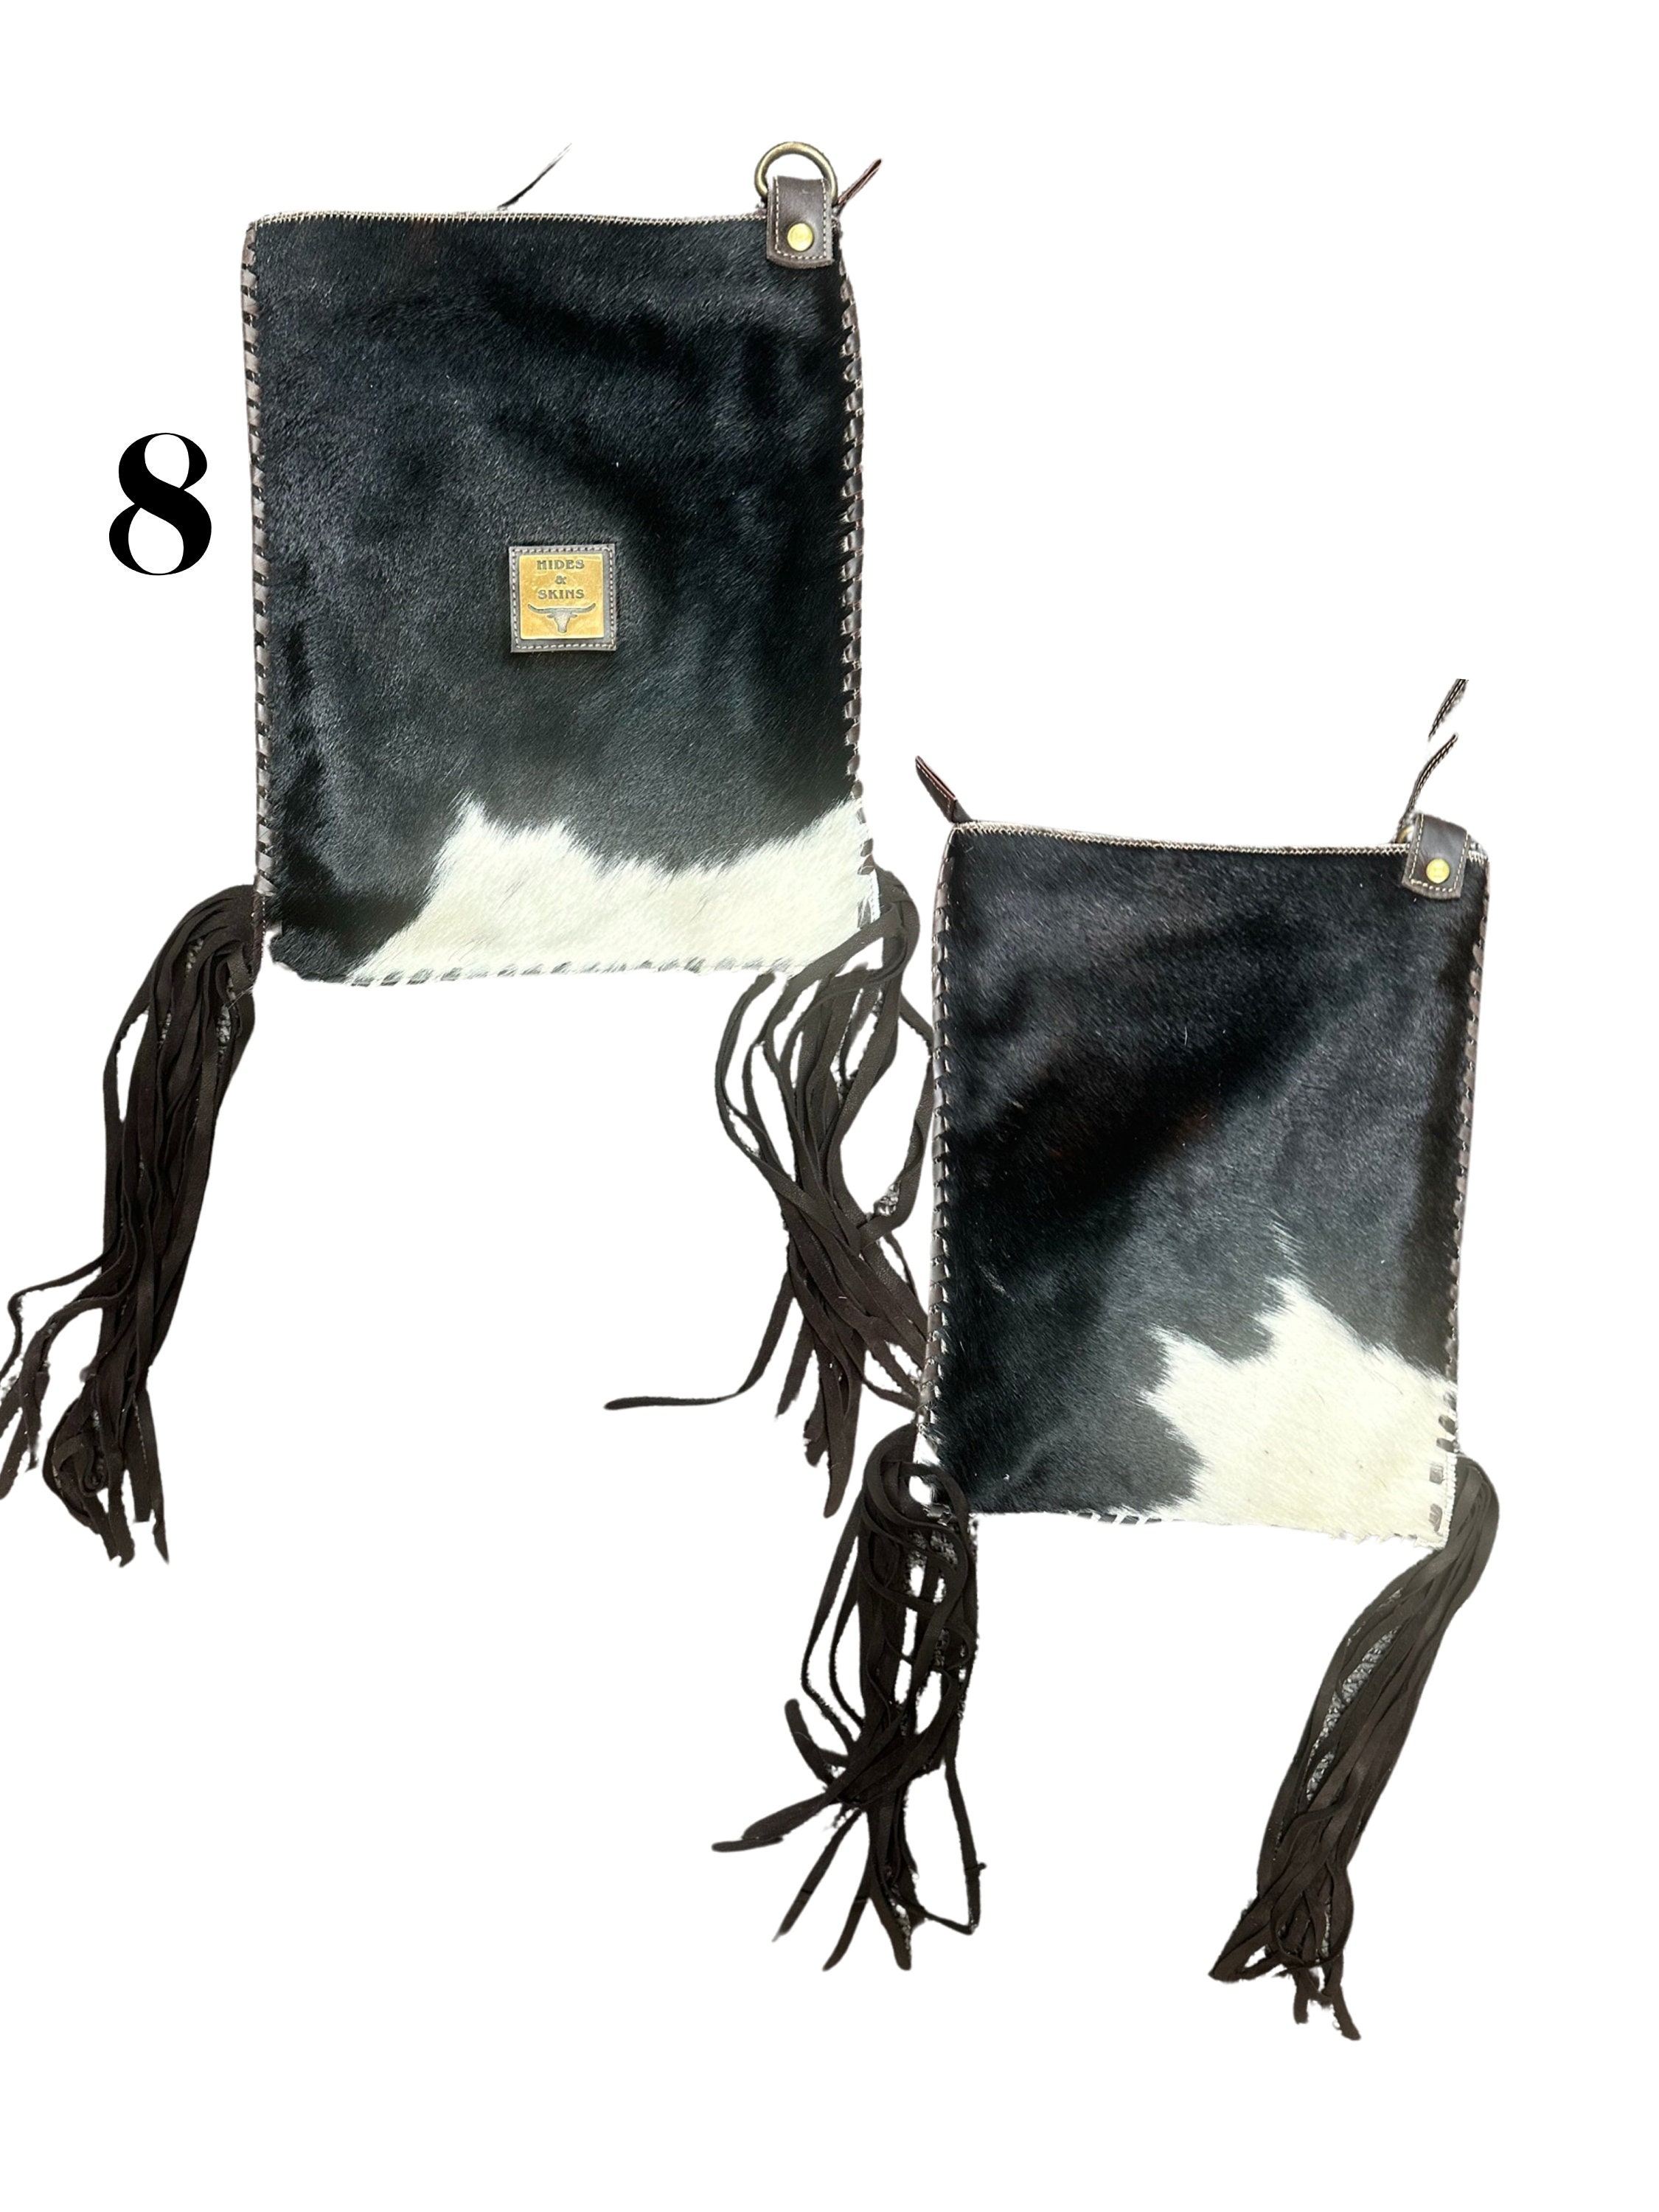 Lacey Southwestern Style CROSSBODY PURSE Bag with Genuine Cowhide